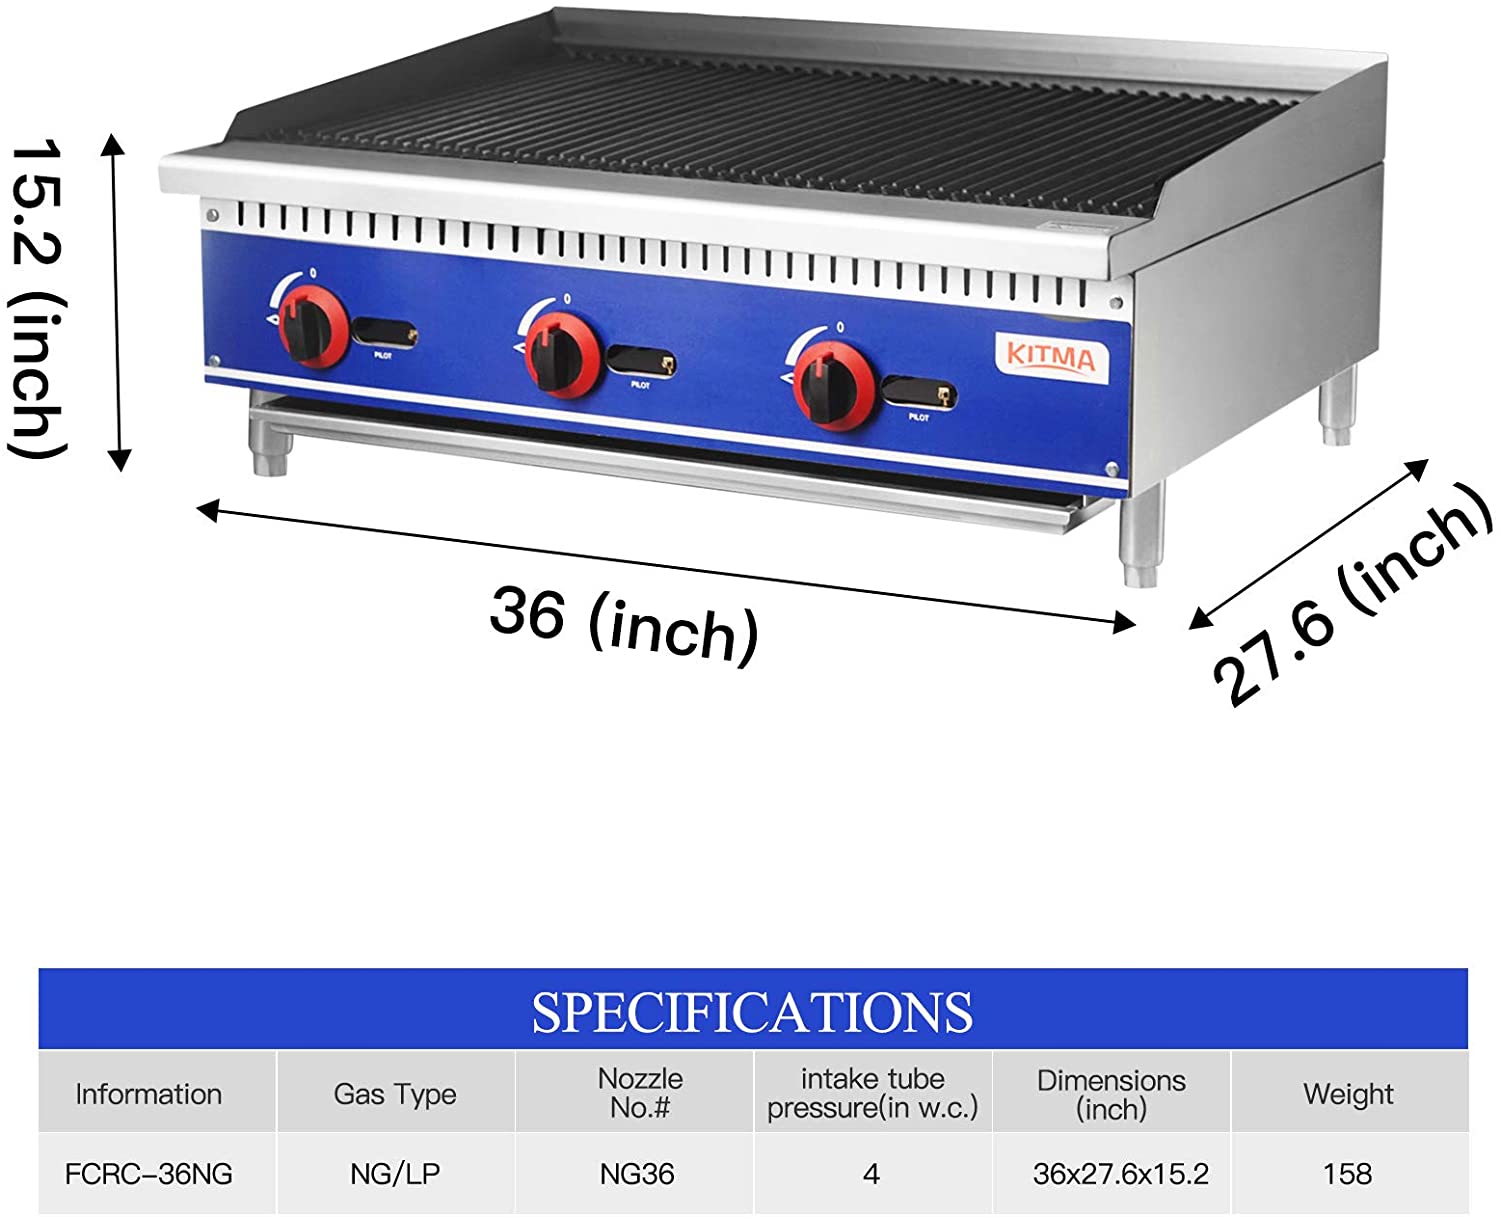 KITMA Commercial Countertop Radiant CharBroiler - 36 Inches Natural Gas Char Broiler with Grill for Barbecue, 105,000 BTU per Hour - image 2 of 7